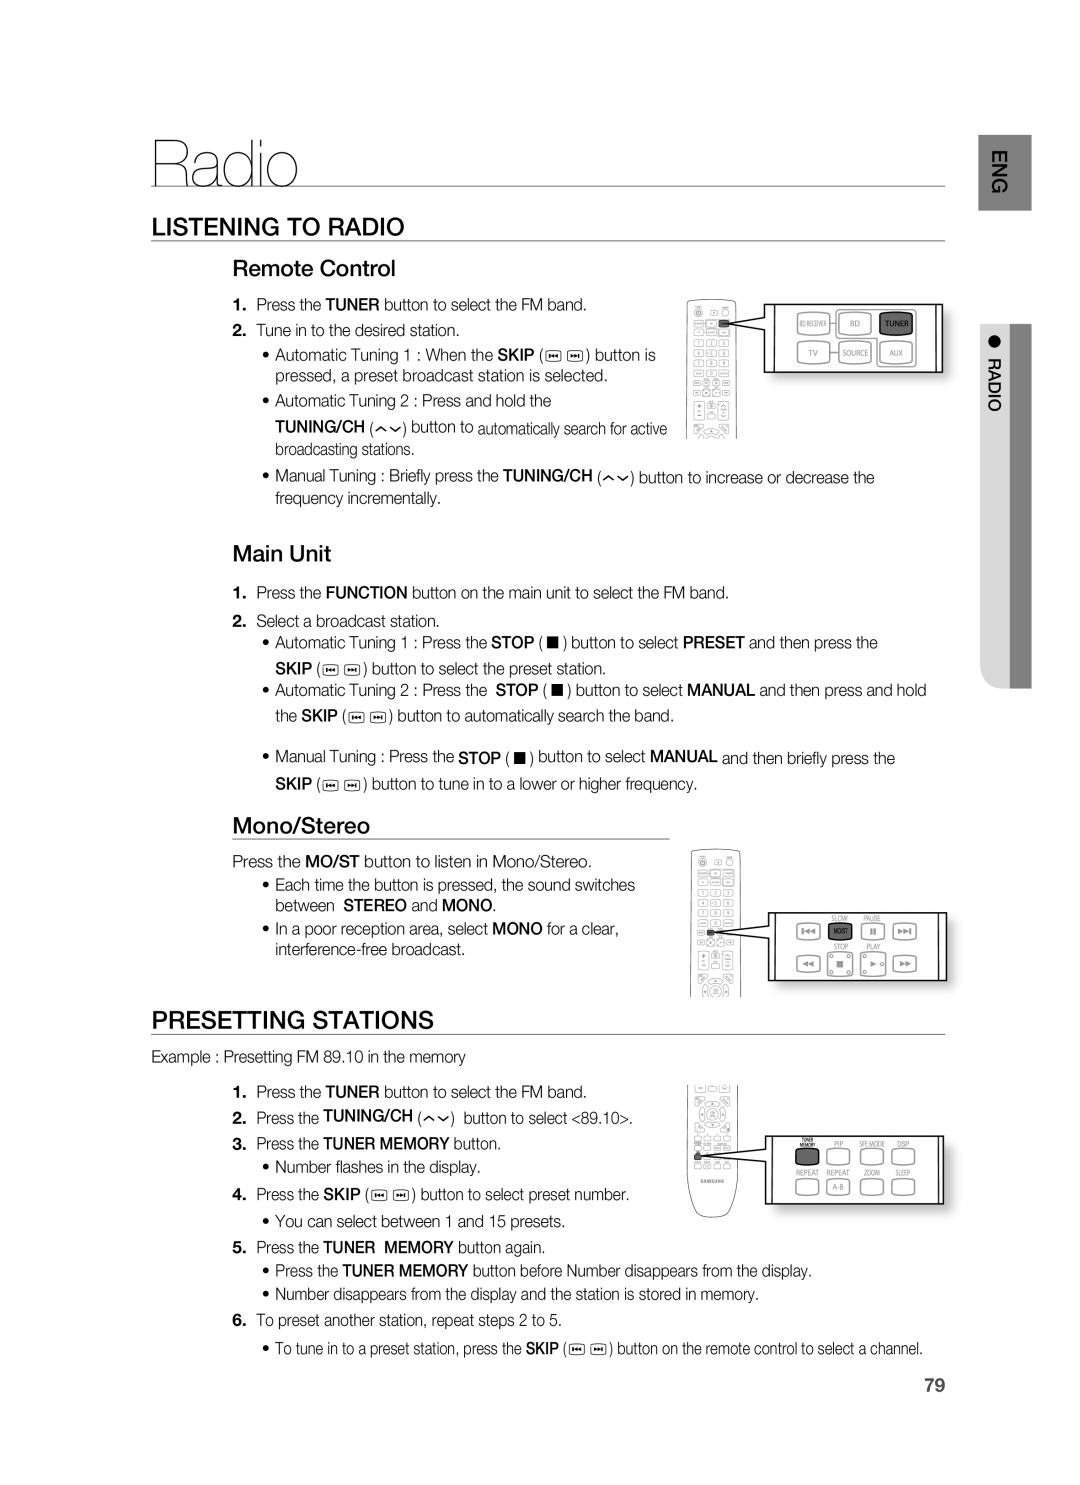 Samsung HT-BD3252 user manual Listening To Radio, Presetting Stations, Remote Control, Main Unit, Mono/Stereo 